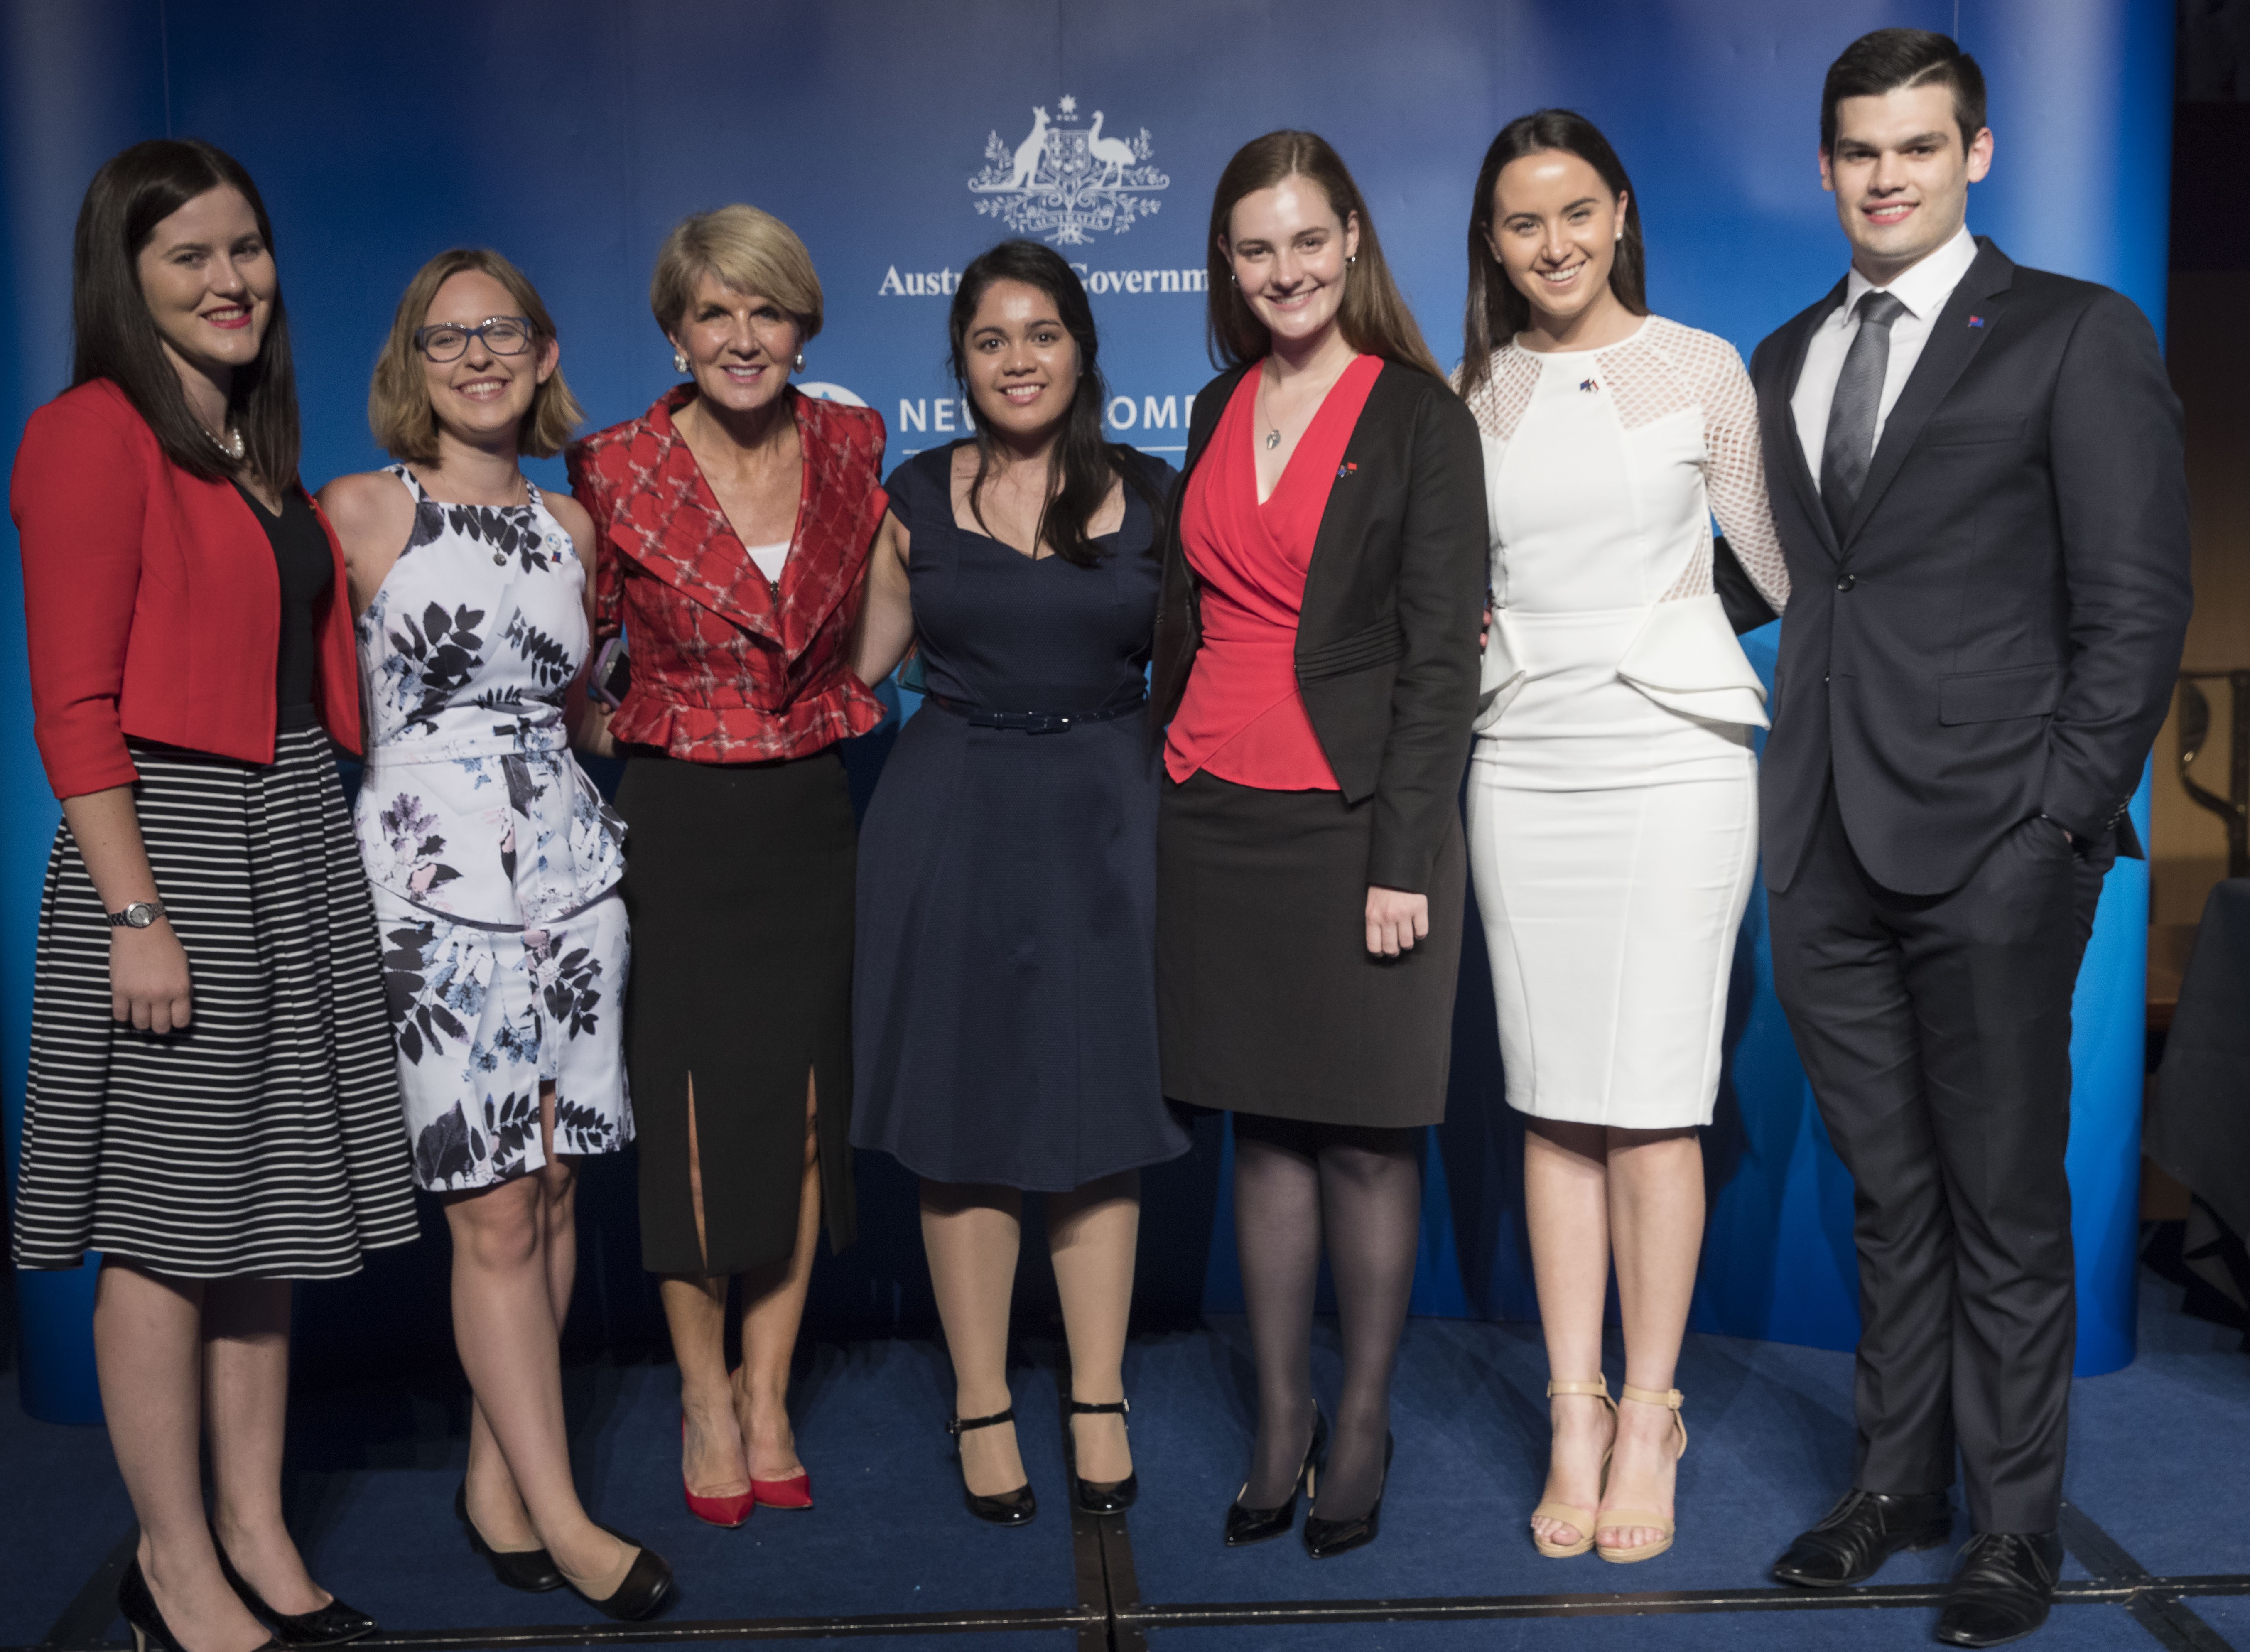 New Colombo Plan recipients with Minister for Foreign Affairs Julie Bishop. From left Leah Brokmann,Molly Jackson, Kim Johnston, Elizabeth Dowrie, Georgia Toft and Shaun Milligan.